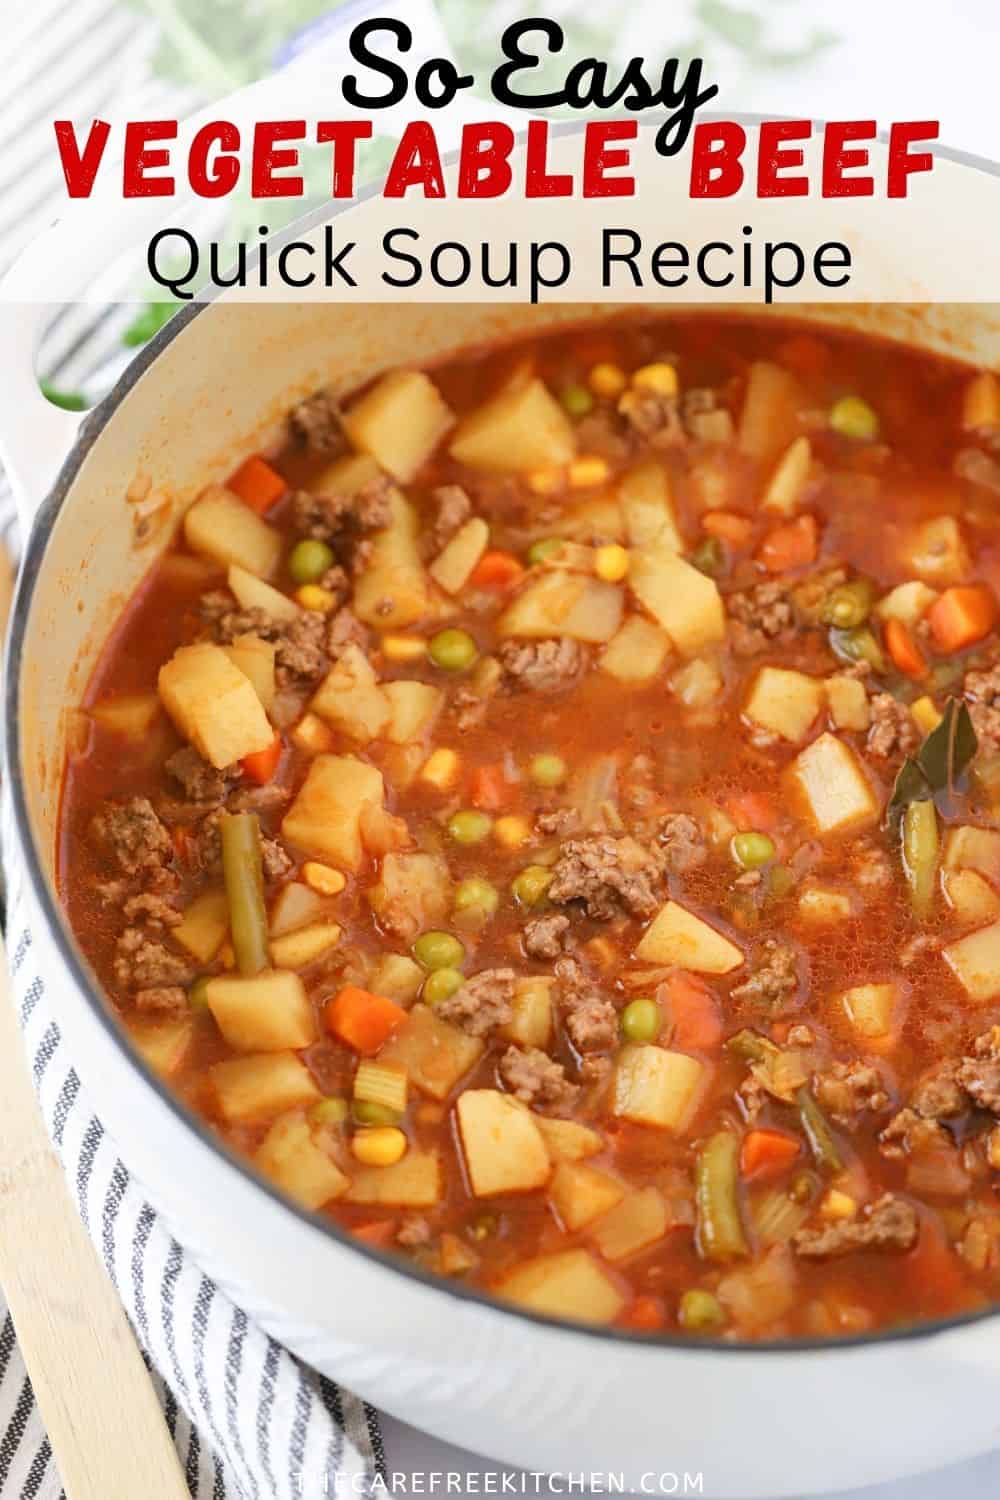 Easy Beef Vegetable Soup - The Carefree Kitchen